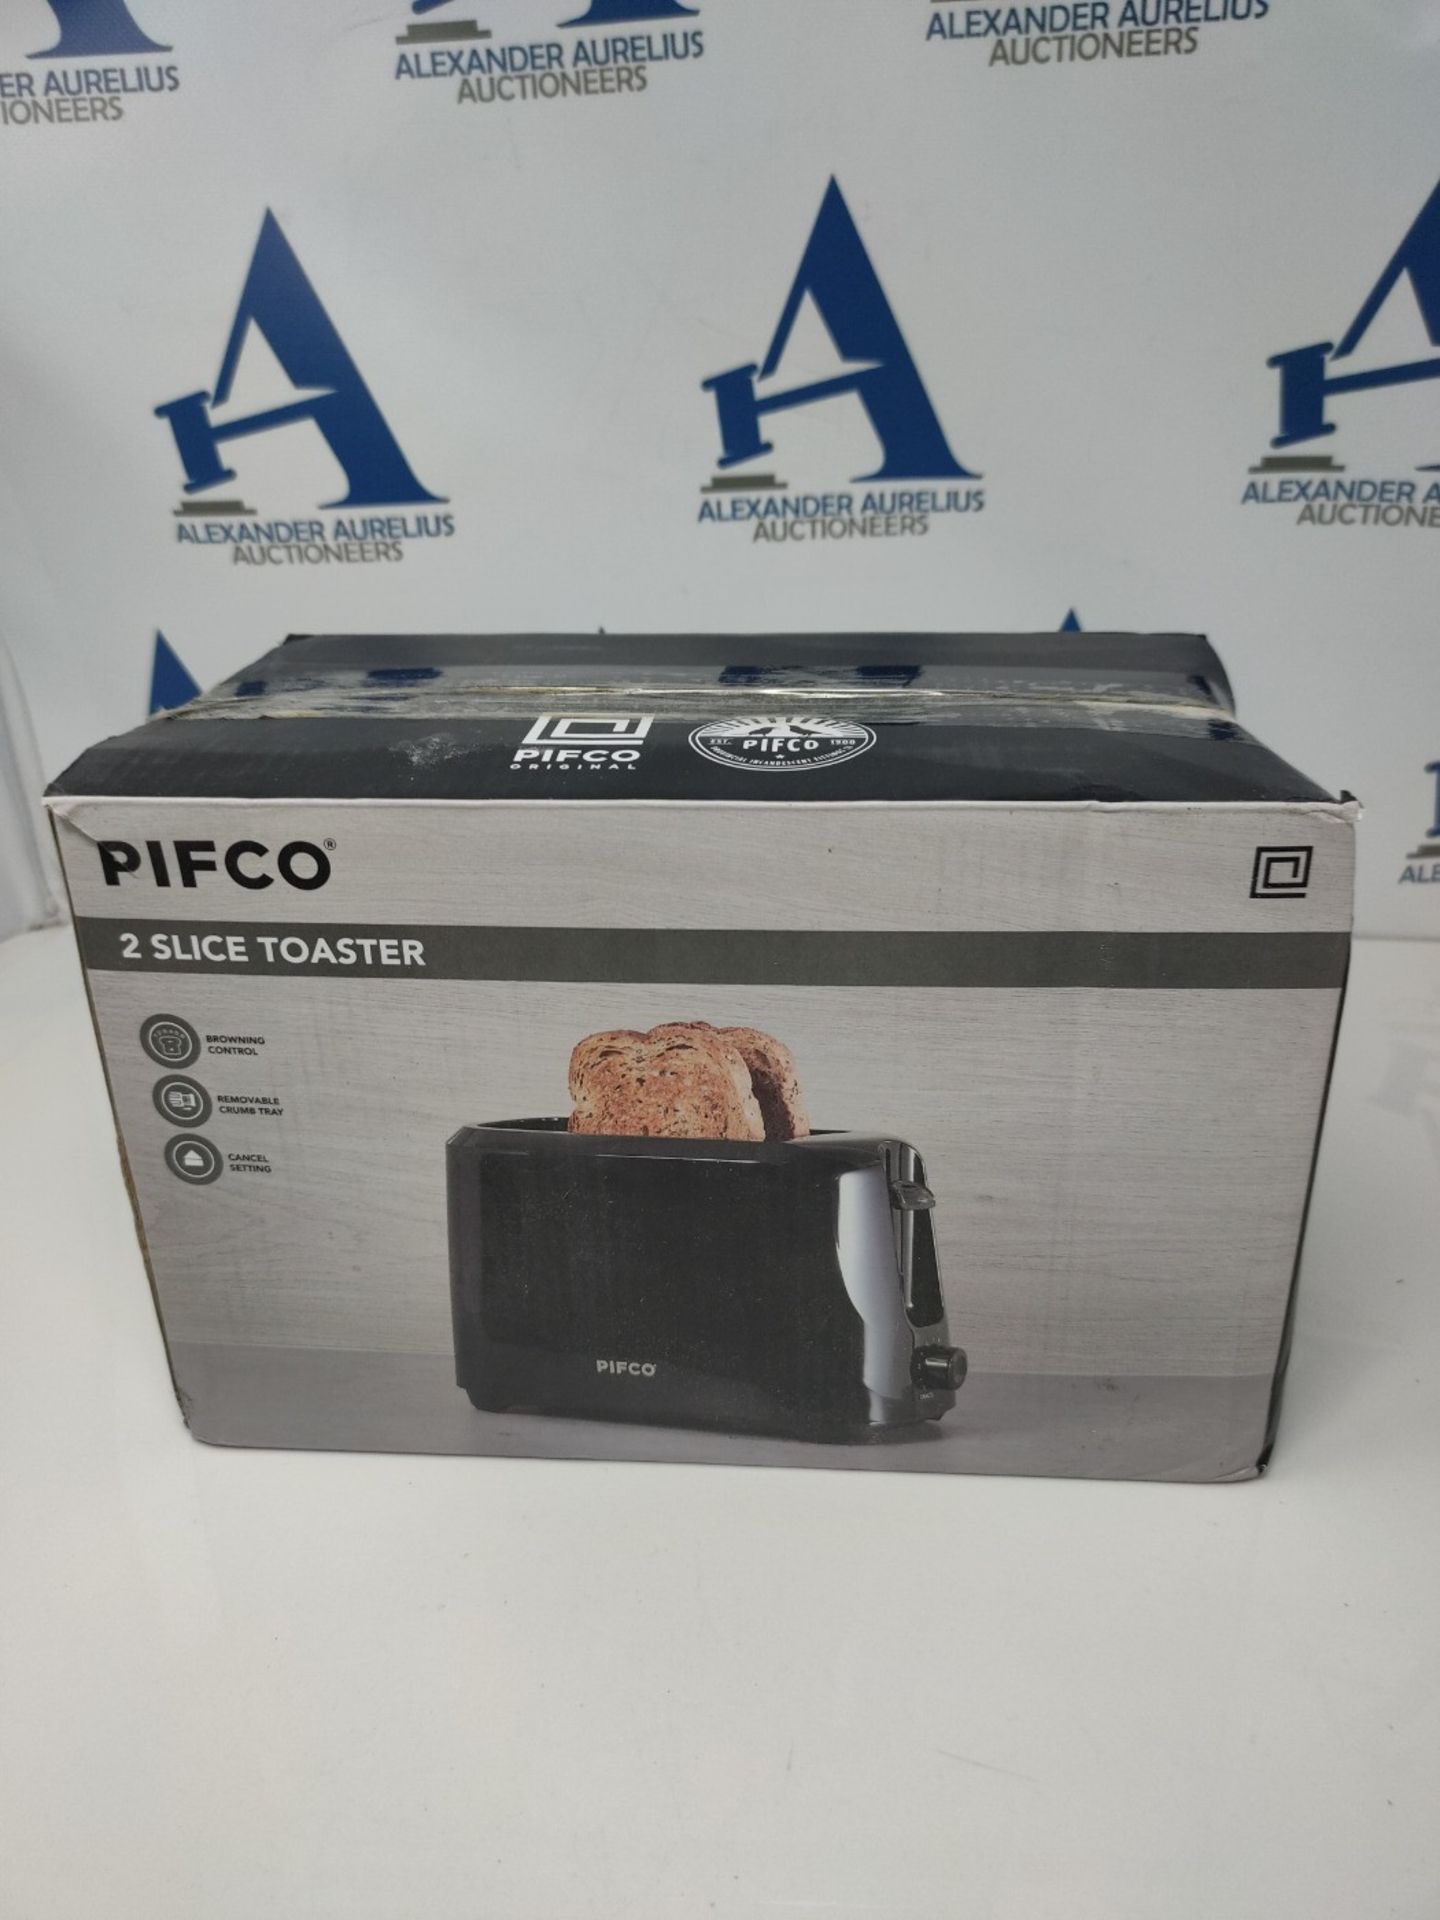 PIFCOÂ® Essentials Black Toaster 2 Slice - 6 Browning Controls & Anti-Jam Function - - Image 2 of 3